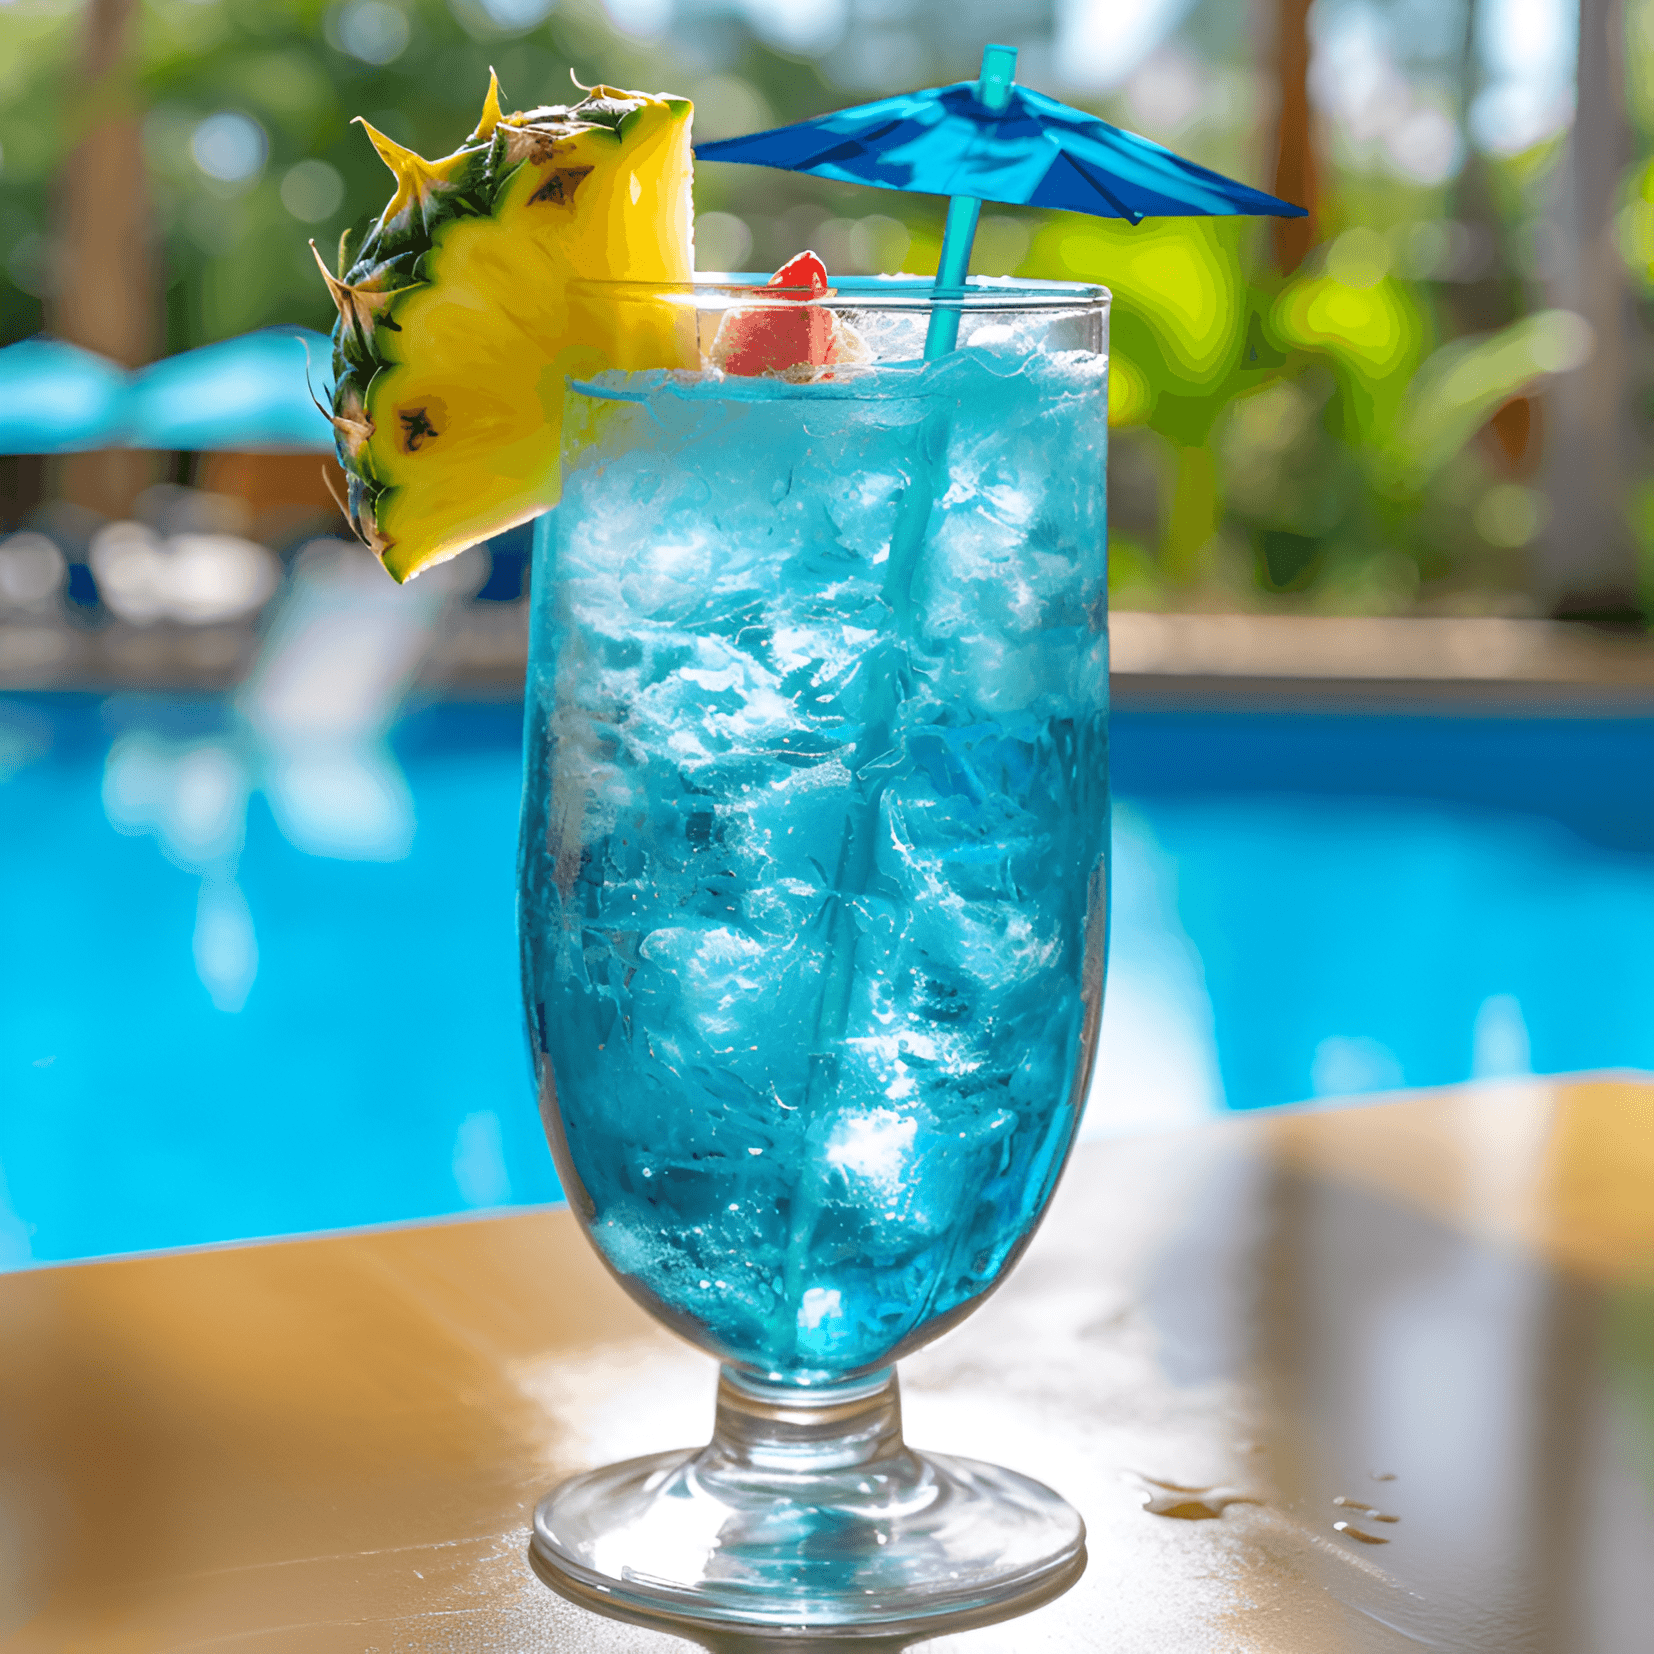 Swimming Pool Cocktail Recipe - The Swimming Pool cocktail has a sweet, fruity, and slightly creamy taste. It is not too strong, making it a perfect choice for those who prefer lighter cocktails. The combination of pineapple, coconut, and citrus flavors creates a refreshing and tropical experience.